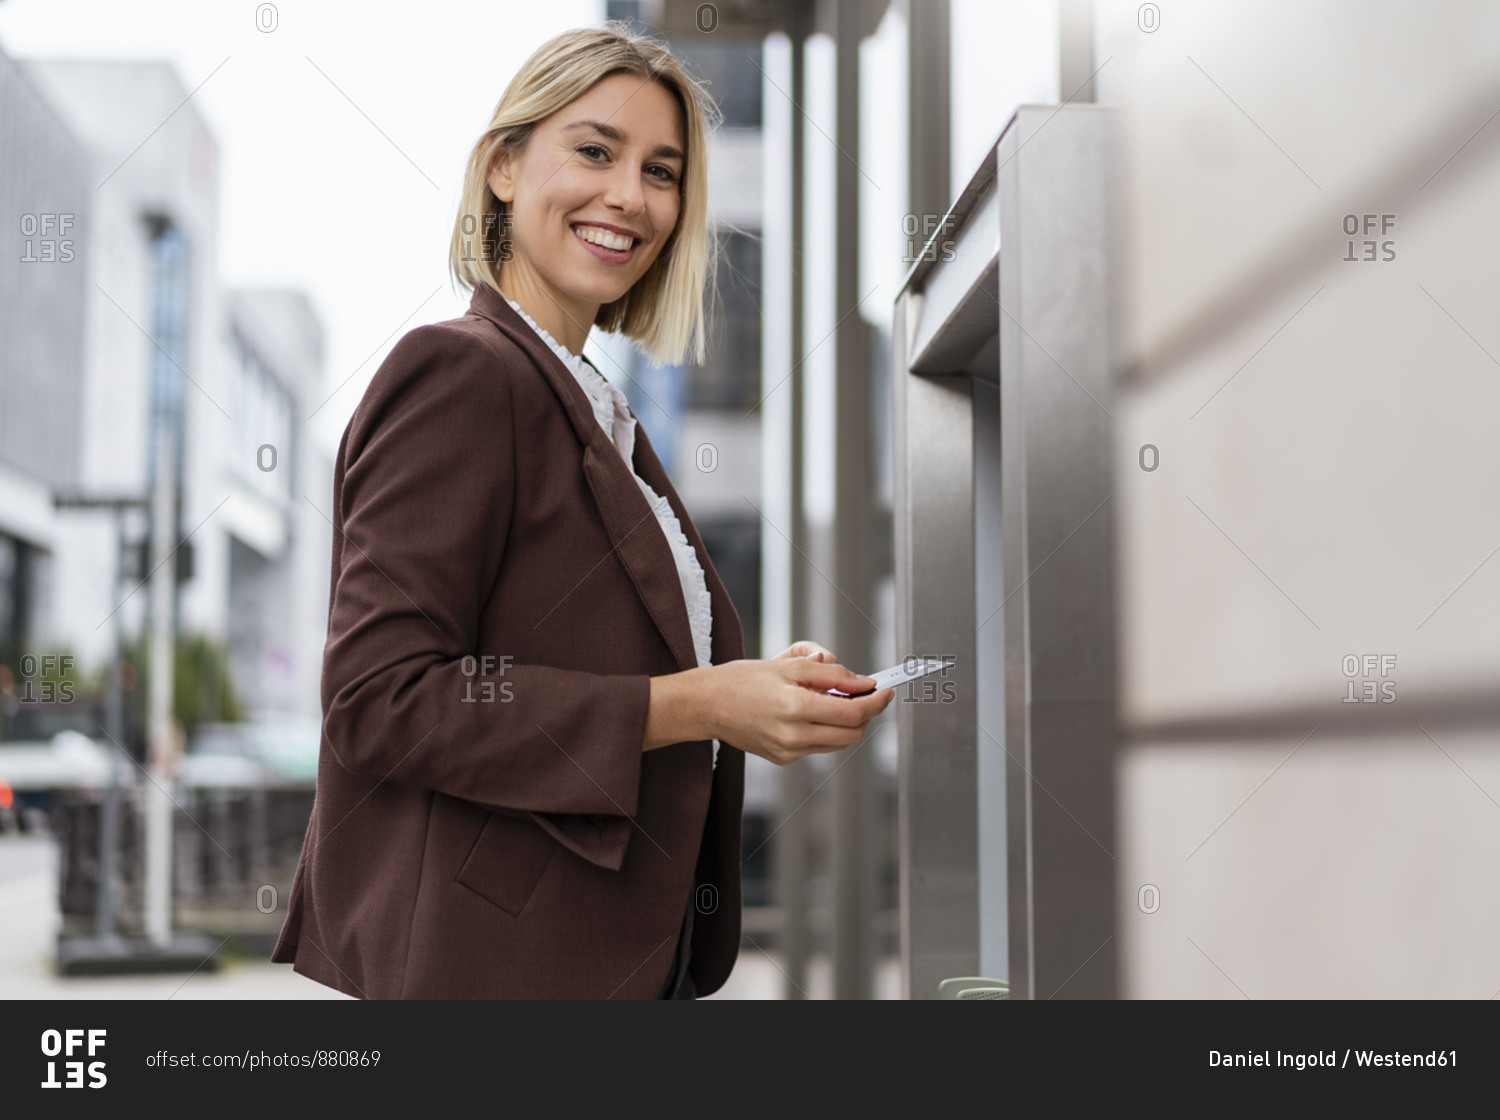 Portrait of smiling young businesswoman withdrawing money at an ATM in the city